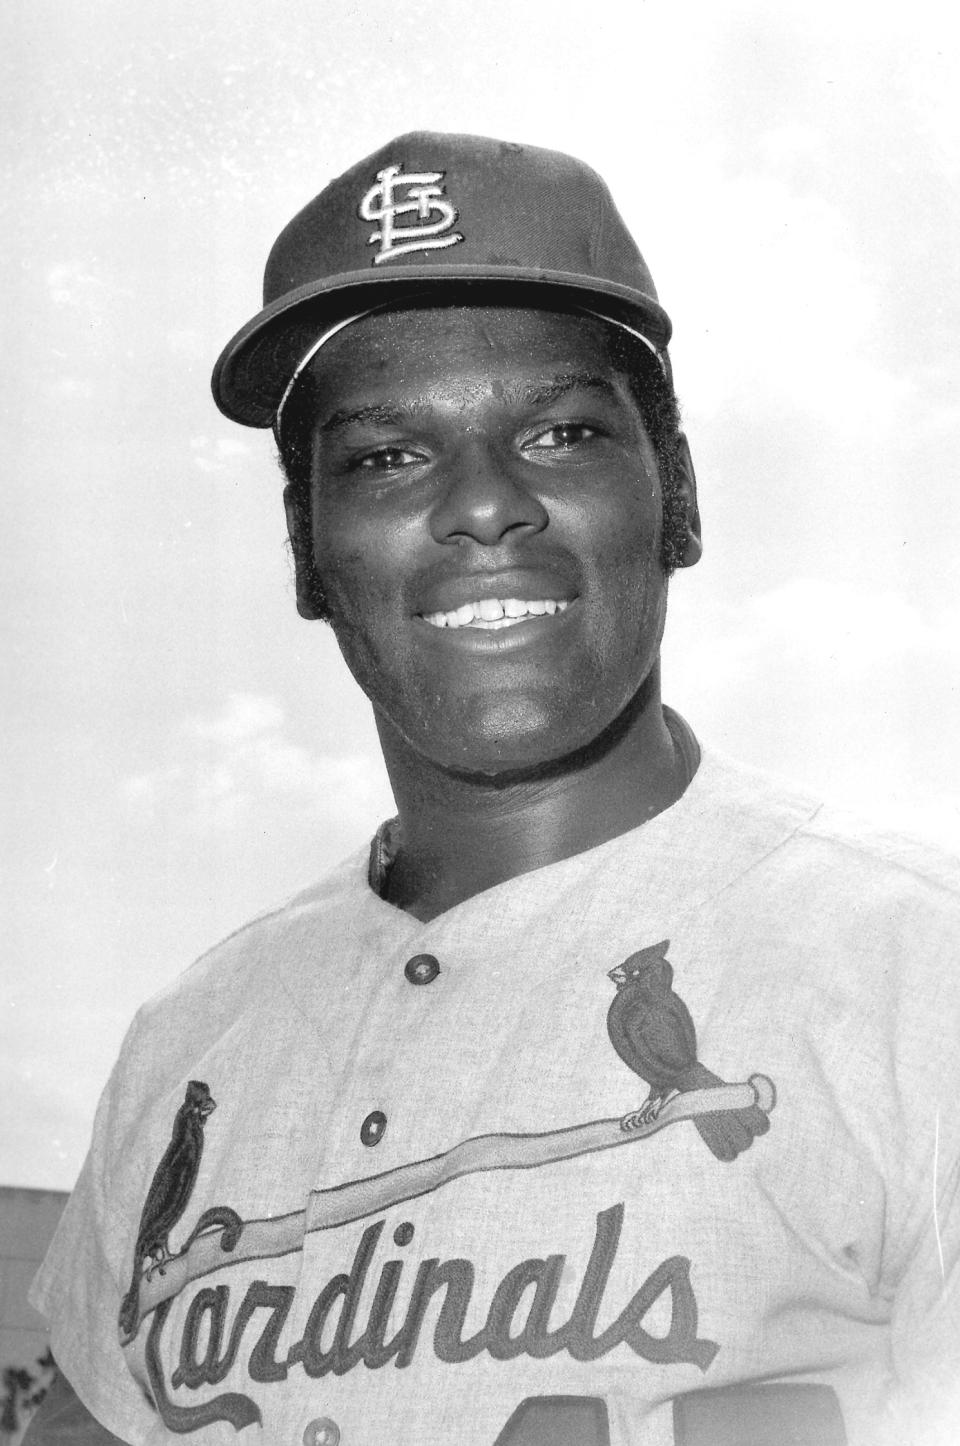 FILE - This March 1970 file photo shows St. Louis Cardinals pitcher Bob Gibson posed during spring training at St. Petersburg, Fla. Names etched on the most coveted cards. Names that crackled from transistor radios. The names that shouted from the pages of hometown newspapers and Baseball Digest issues at a moment in the game’s history that seems for some like just yesterday but, propelled by the losses of the past year, is starting its inexorable fade. Gibson died Oct. 2, 2020. (AP Photo/File)